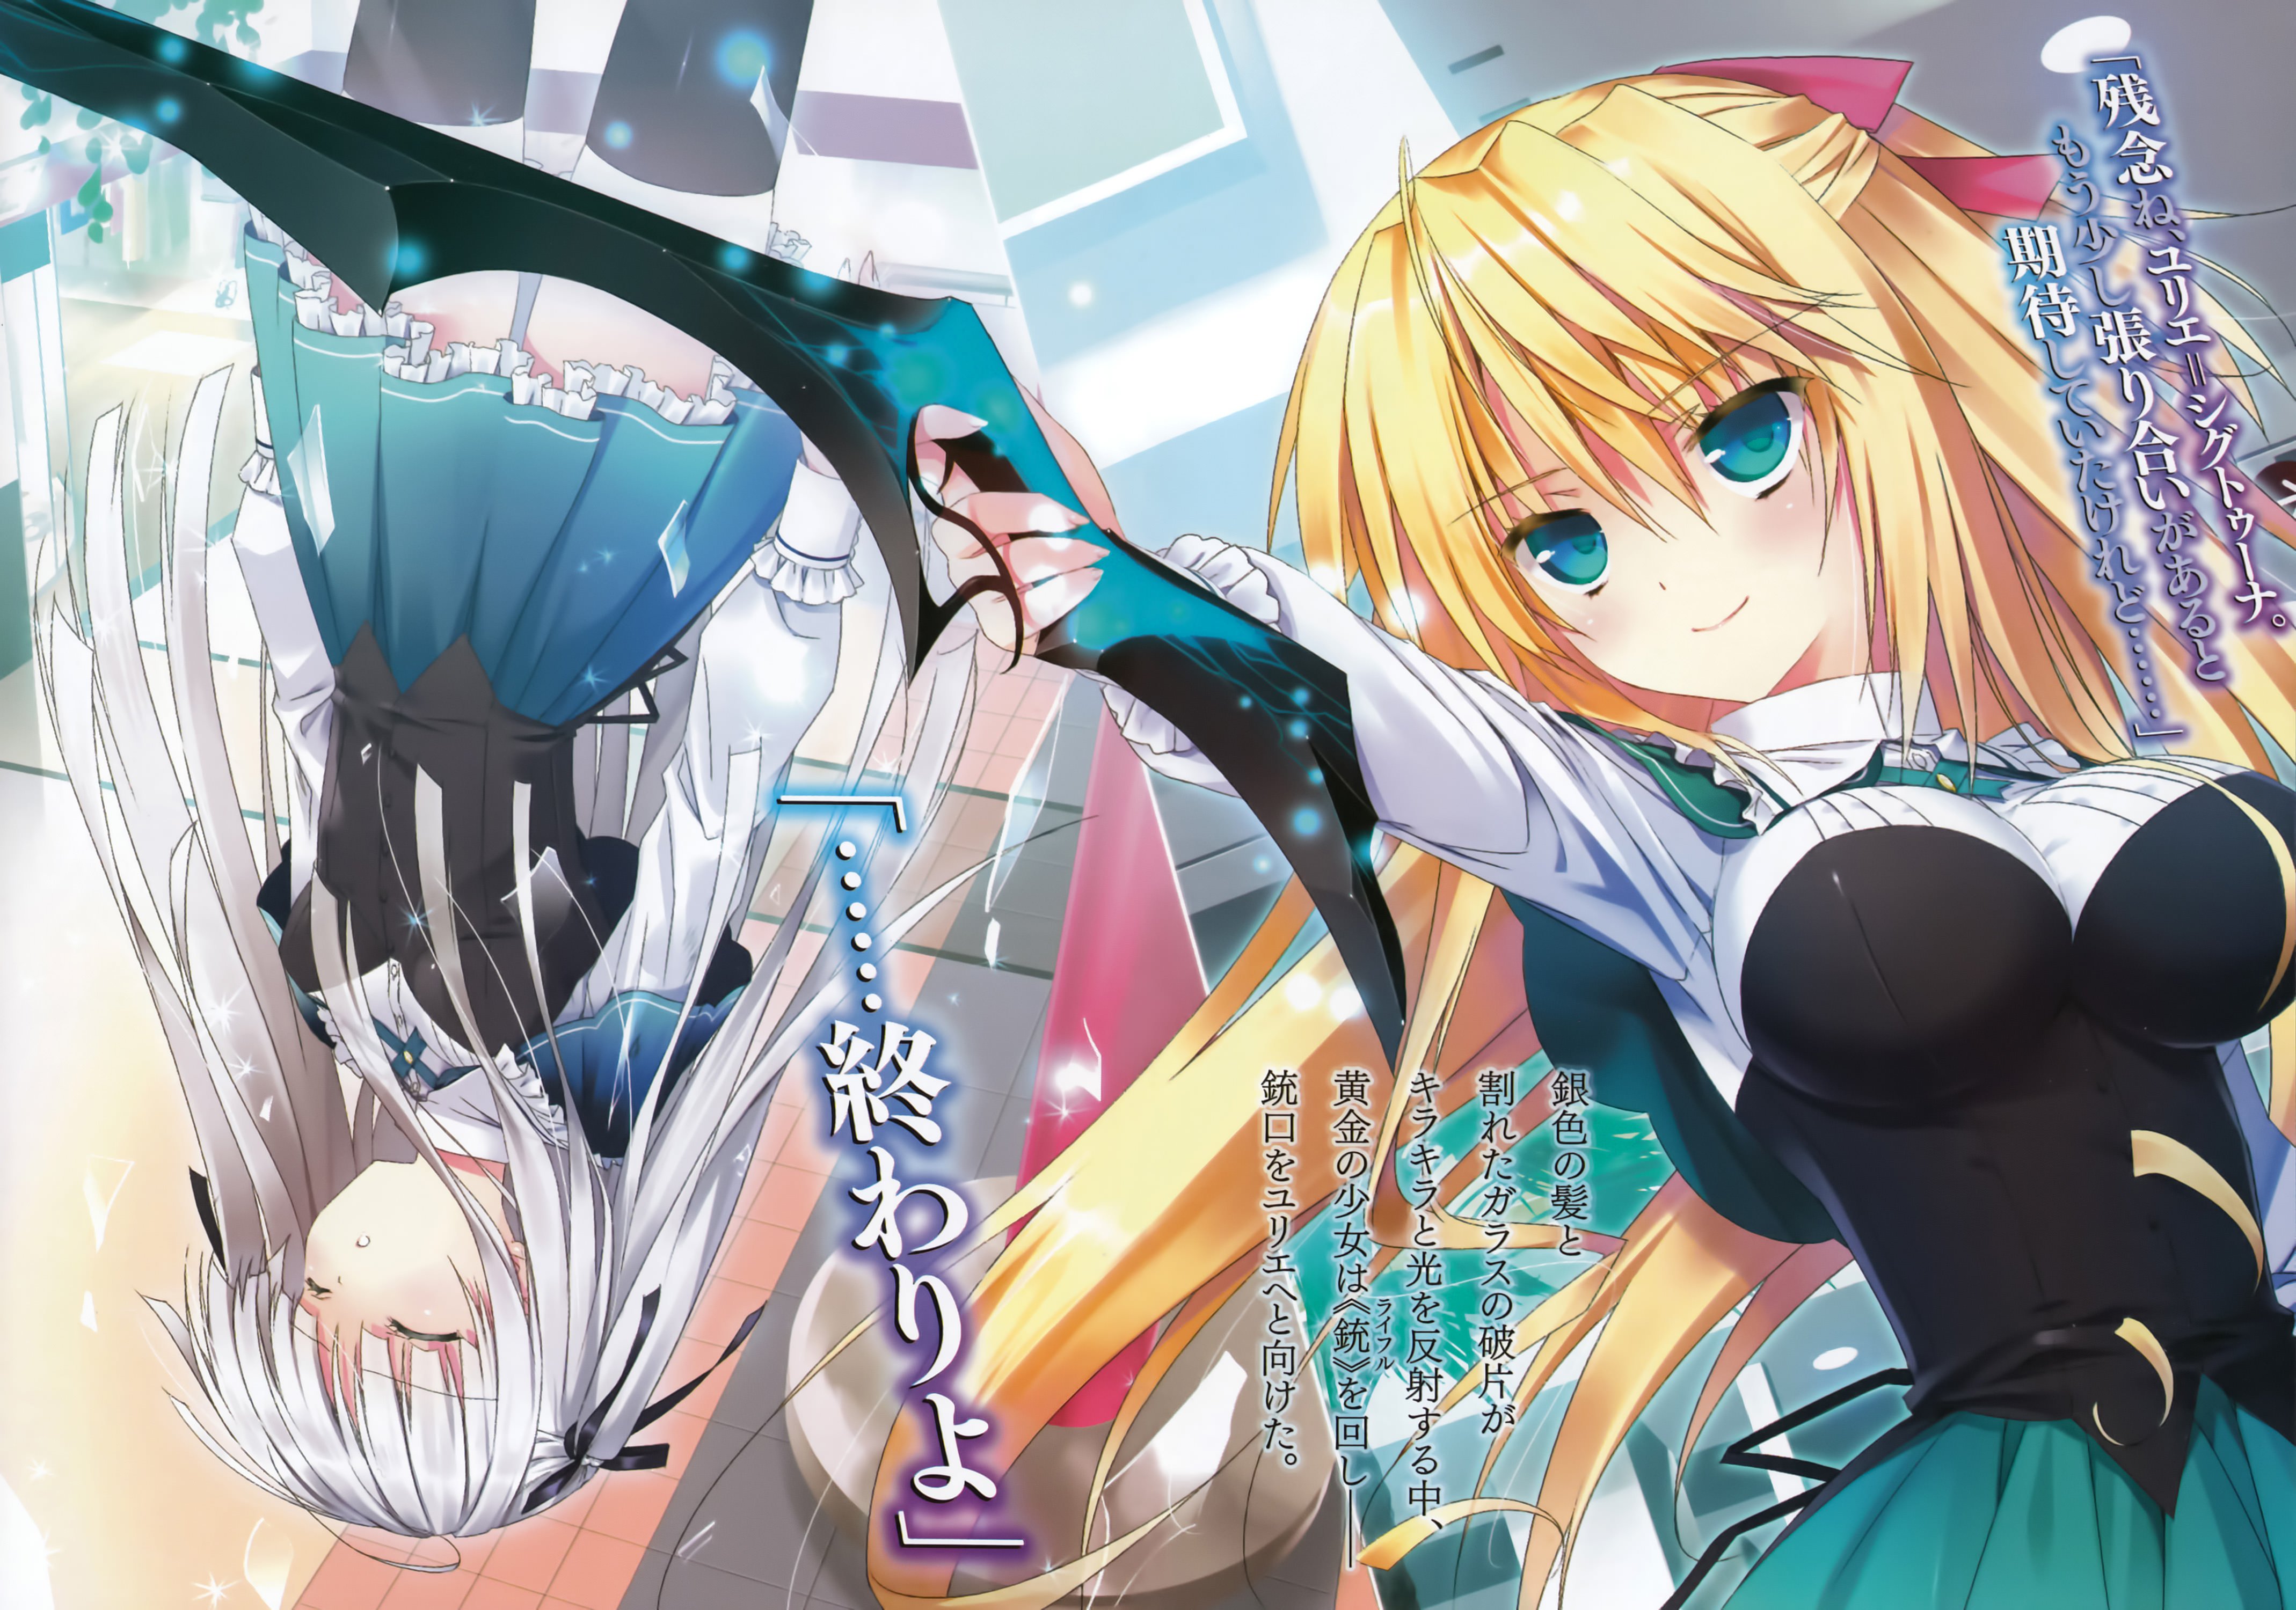 Anime 4277x3000 anime anime girls anime games Absolute Duo  Julie Sigtuna (Absolute Duo) Lilith Bristol (Absolute Duo) Asaba Yuu weapon silver hair blonde school uniform